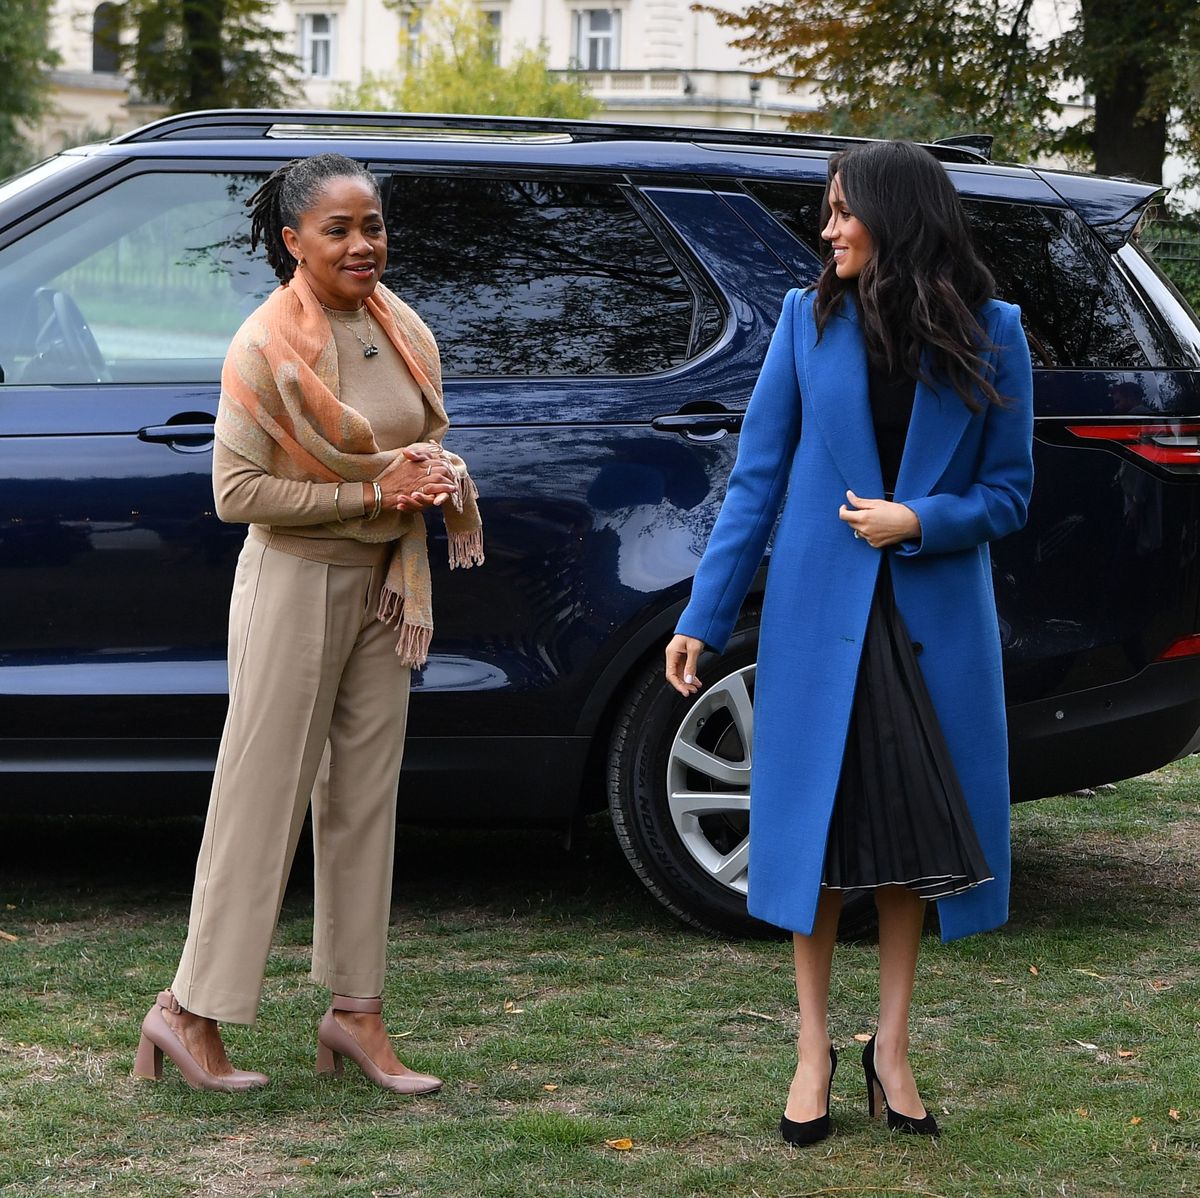 meghan-duchess-of-sussex-arrives-with-her-mother-doria-news-photo-1036415908-1537451606.jpg?crop=0.668xw:1.00xh;0,0&resize=1200:*